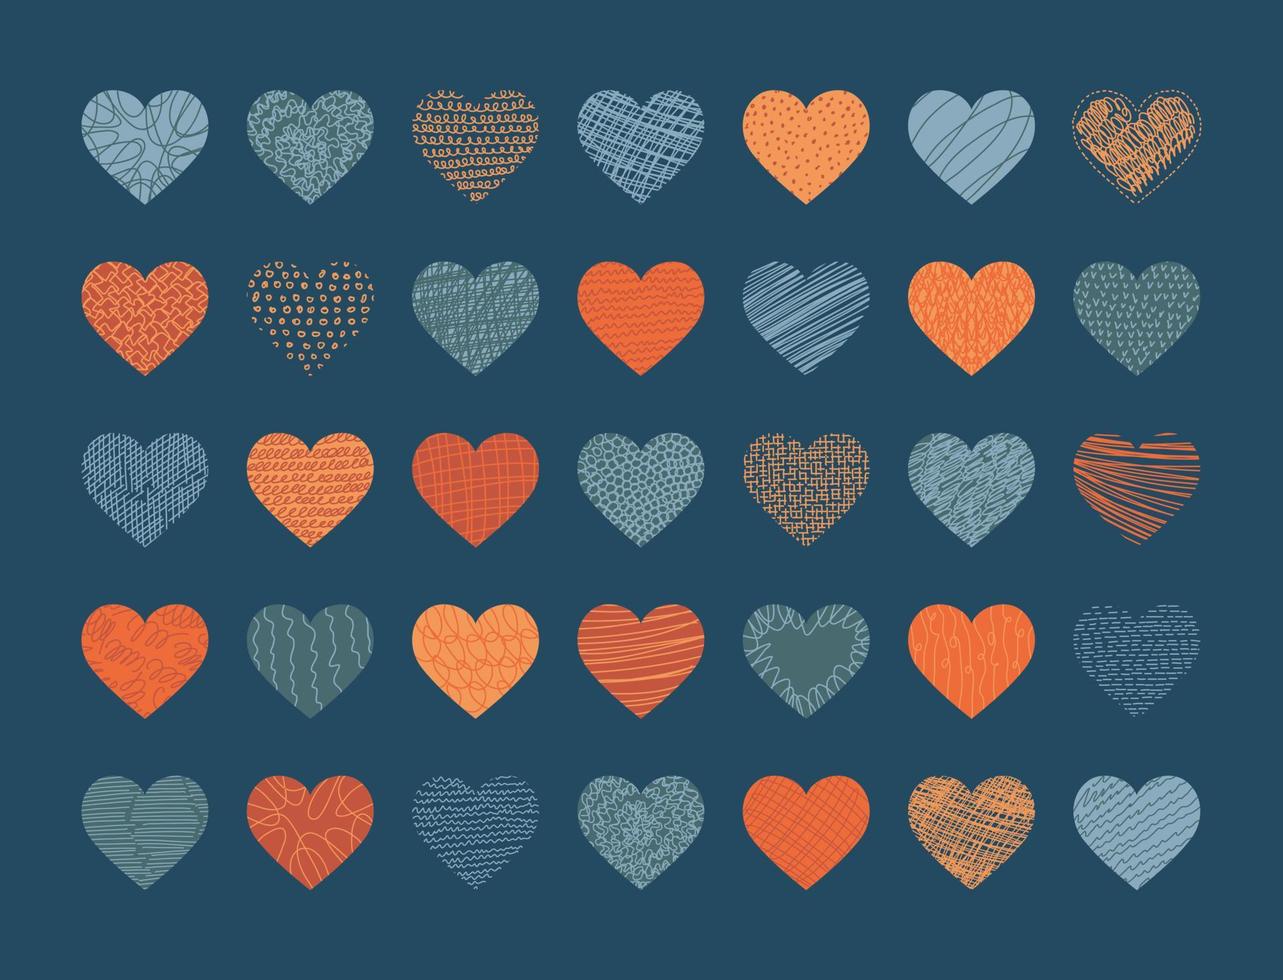 Vector set of hearts with texture. Patterns of hand drawn curves, lines, spots. Contemporary concept trend flat illustration. Doodle icons collection shaped backgrounds for social networks, posters